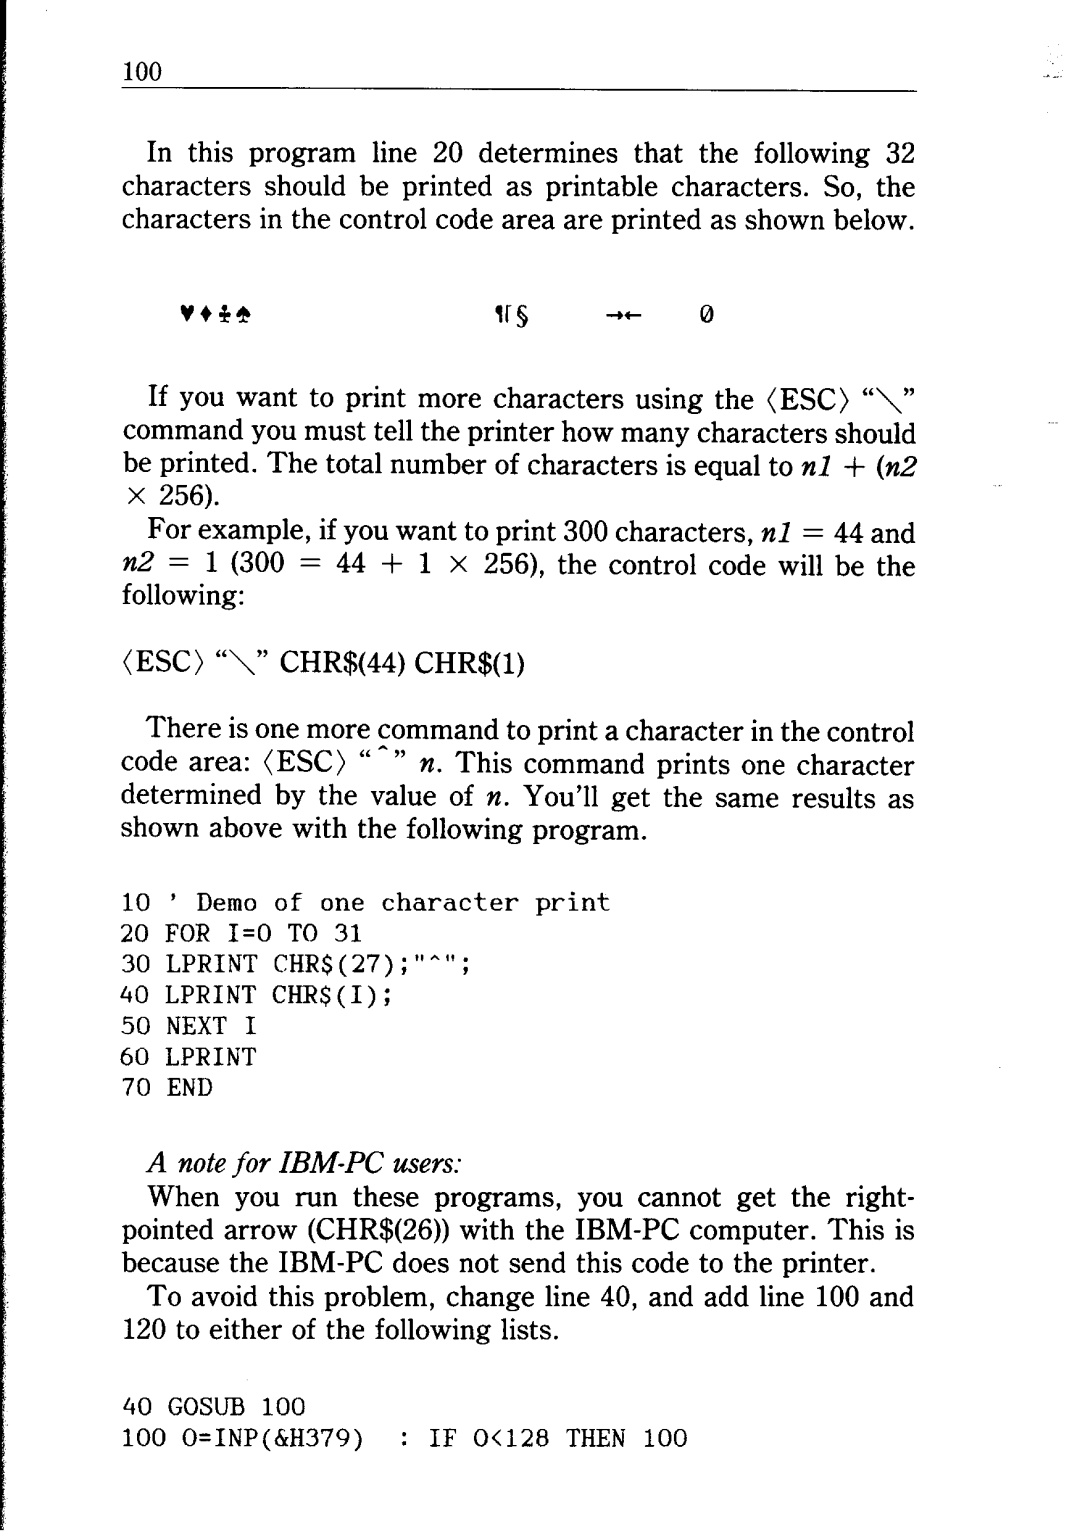 Star Micronics NB24-10/15 user manual A note for IBM-PC users 